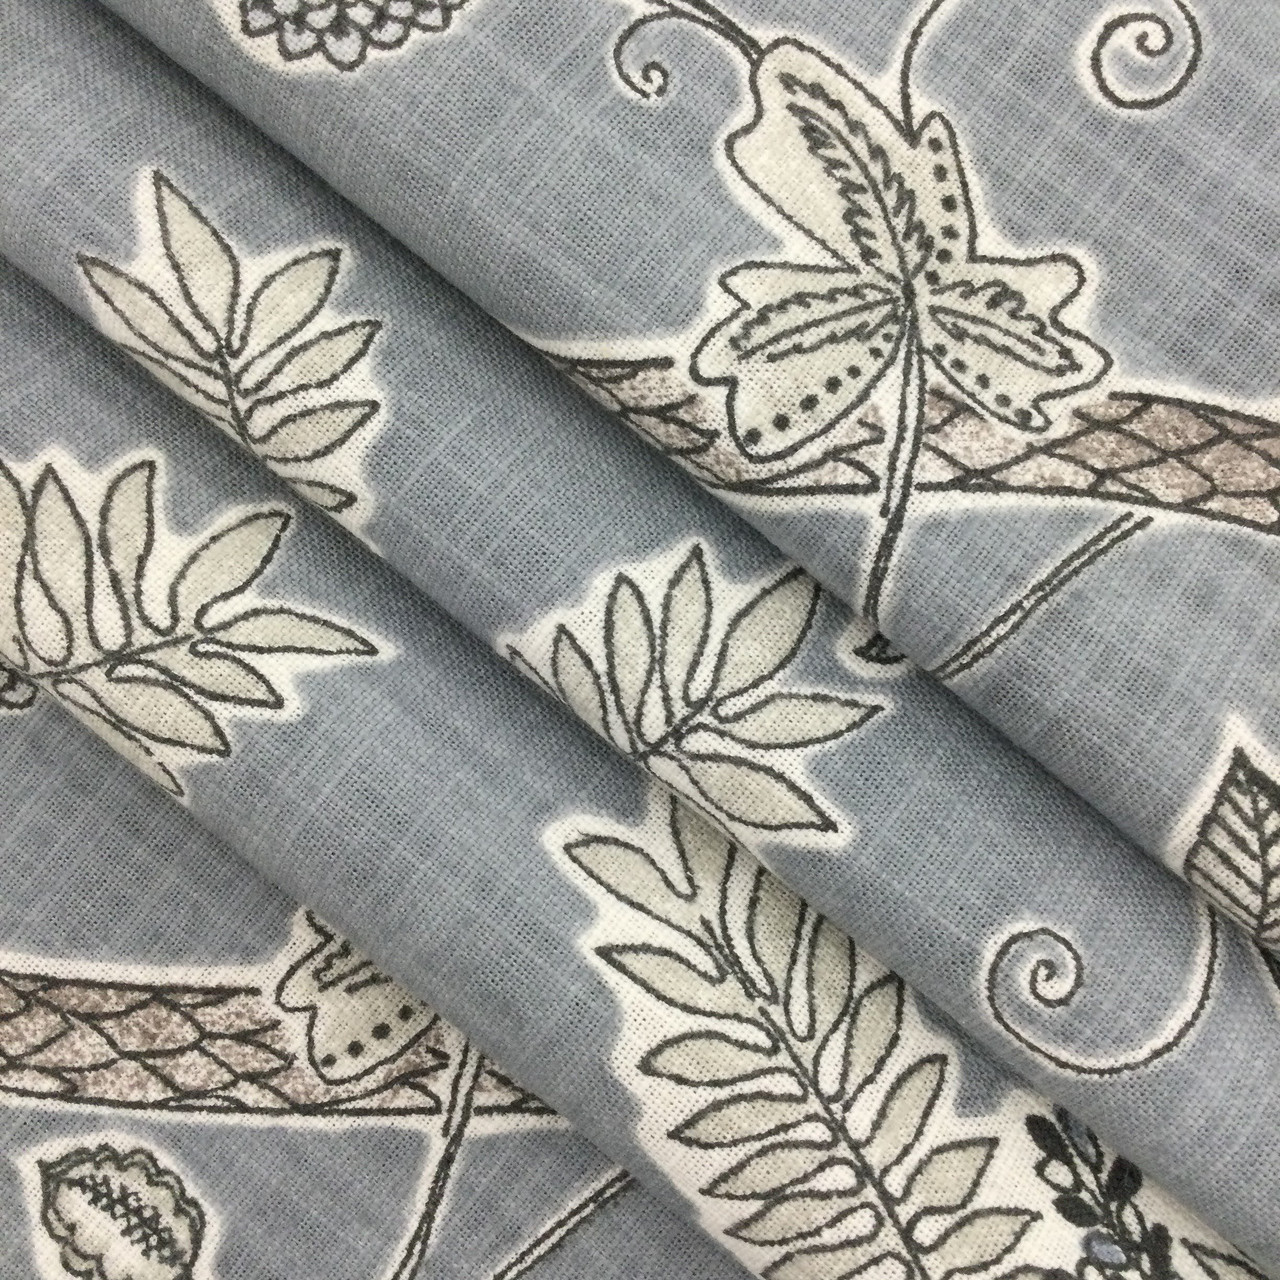 Vintage Designer Taupe, Grey and Silver Chair Upholstery Fabric Remnants-  Set of 6